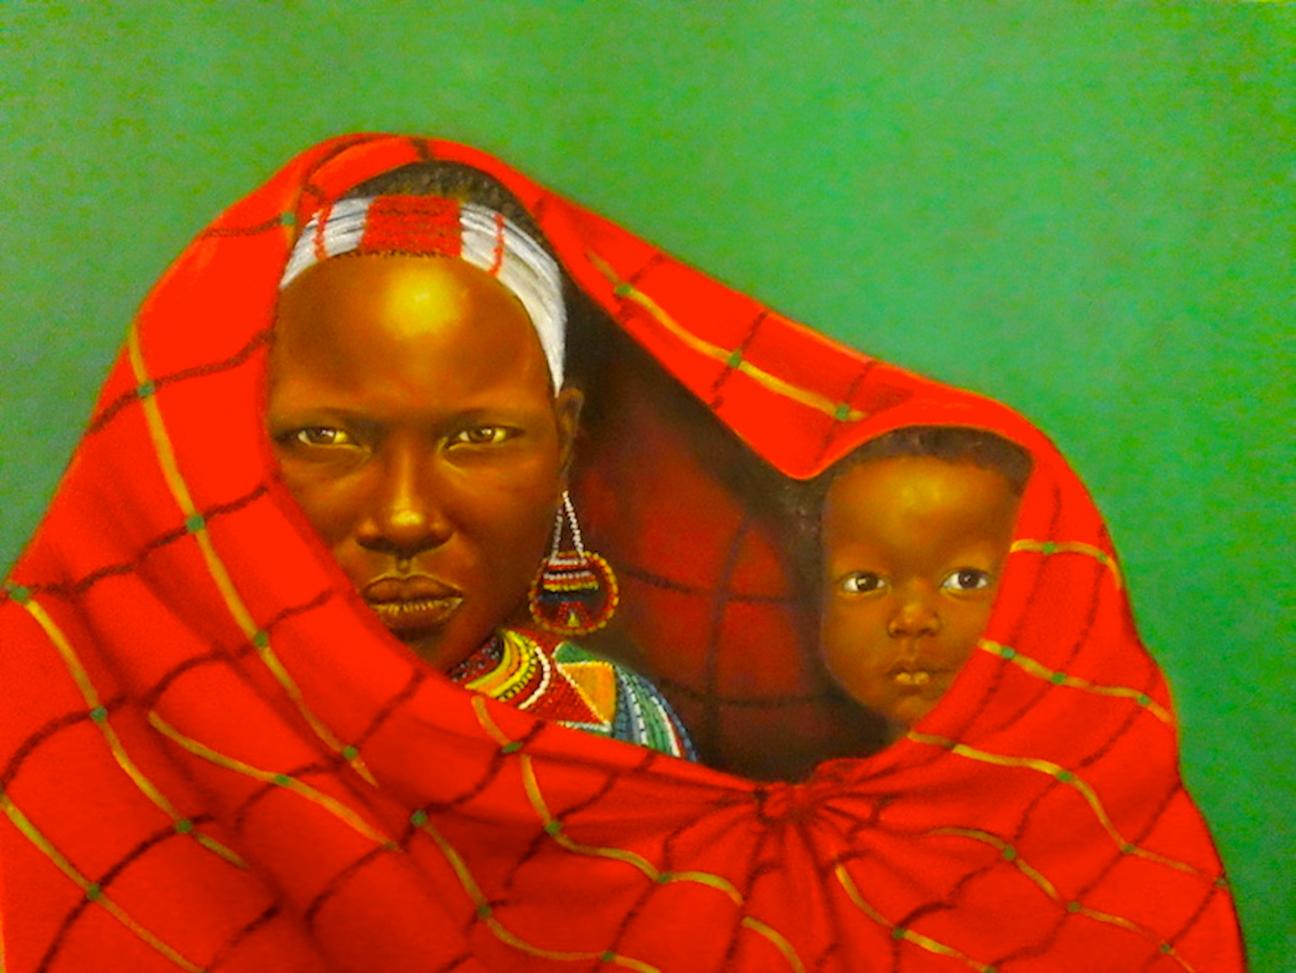 Masaai Mother and Child painted by Laurie Scott-Reyes